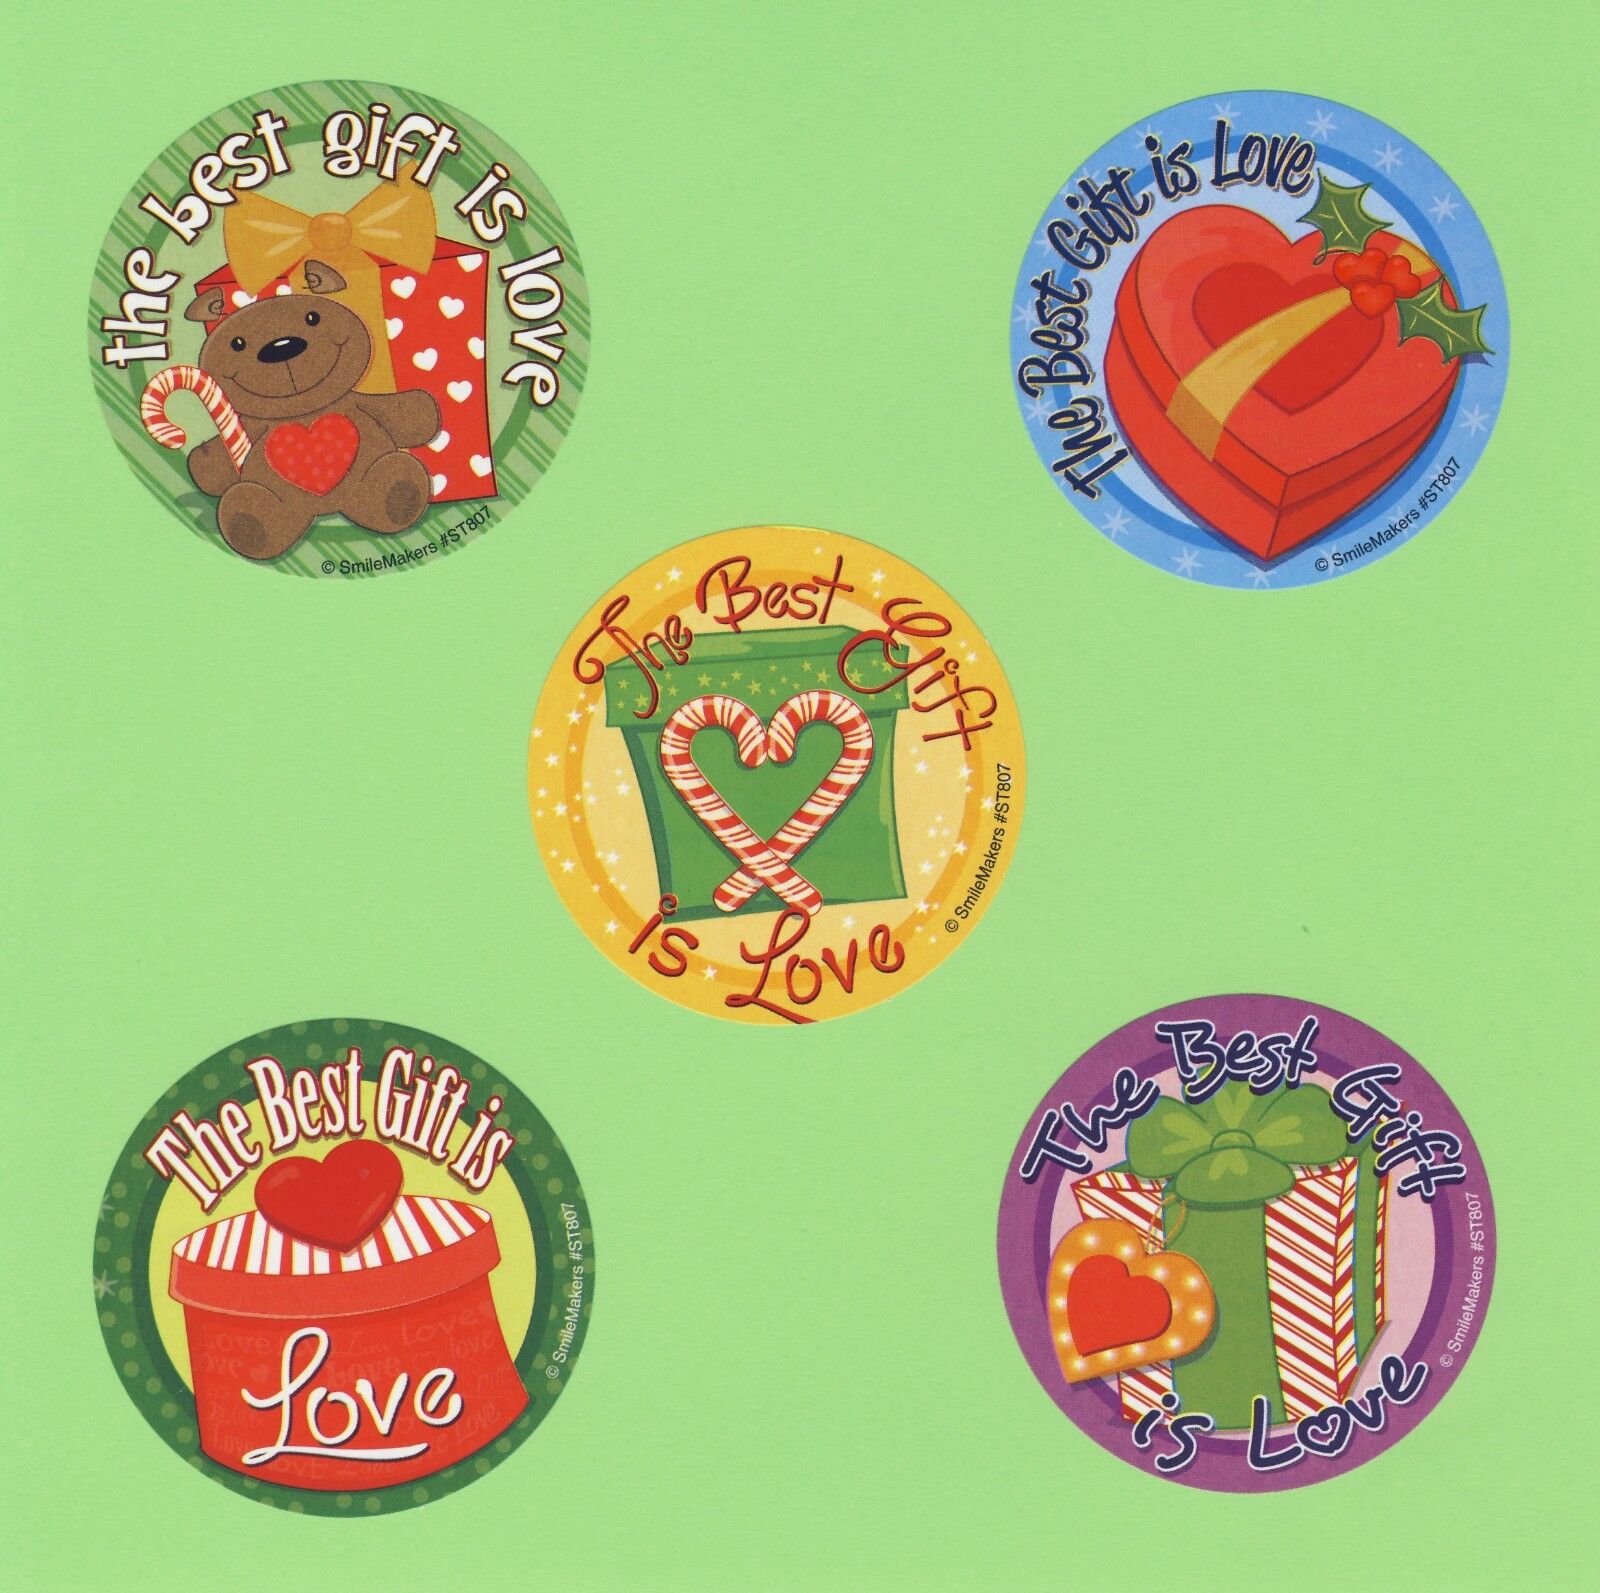 75 The Best Gift is Love - Large Stickers - Christmas Winter Hol